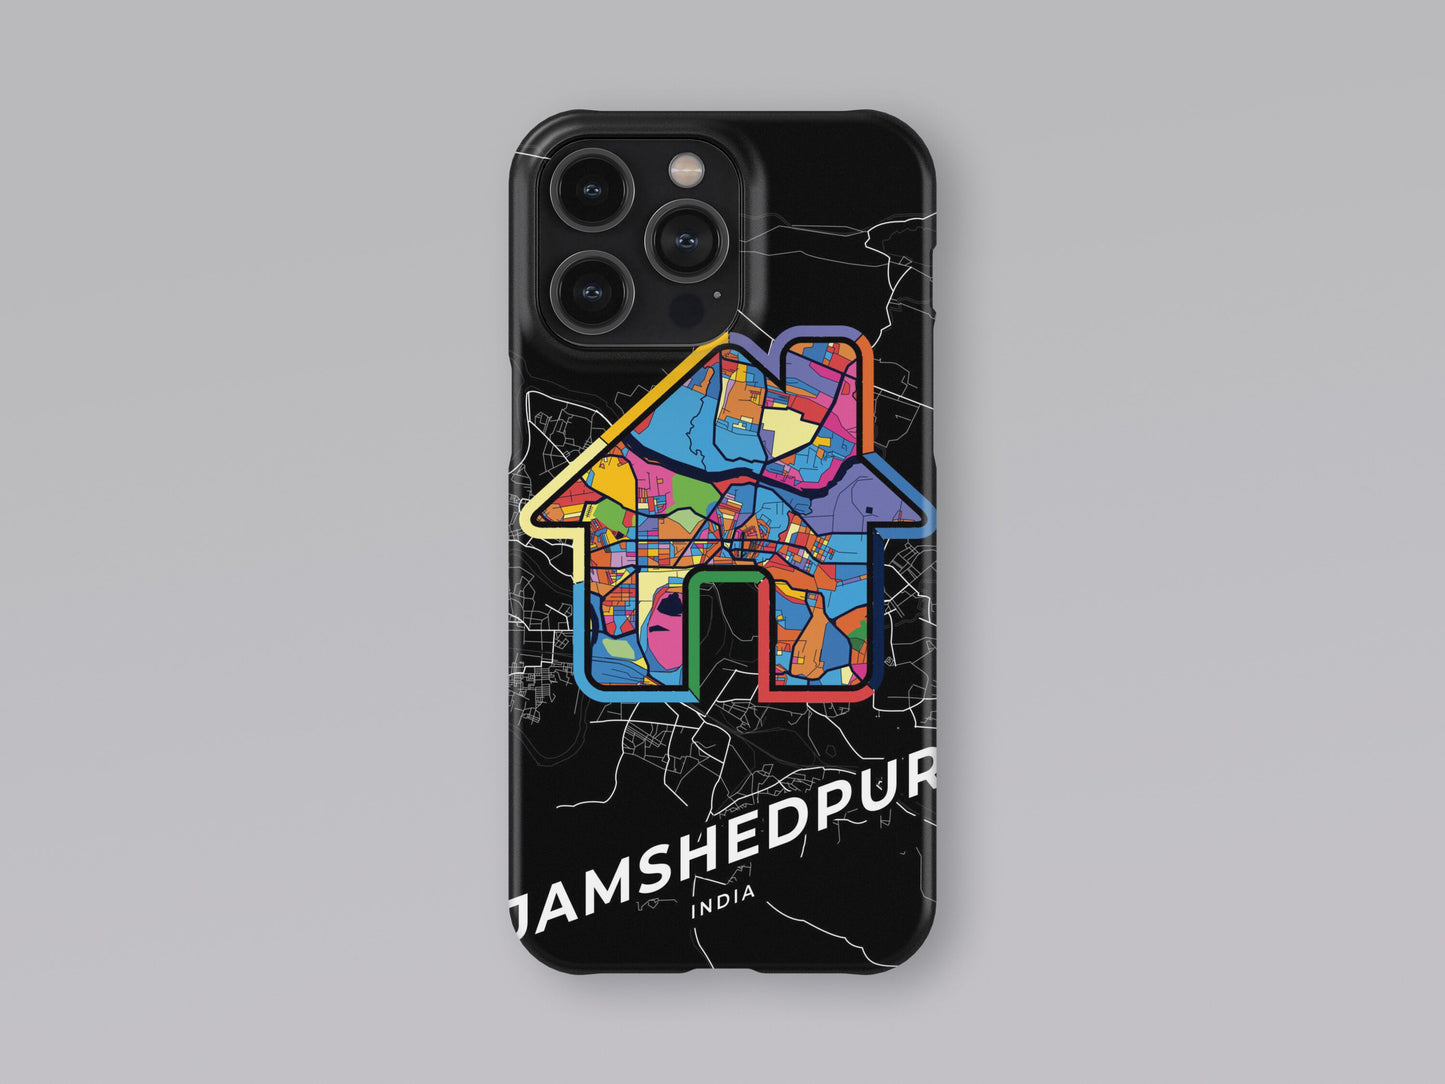 Jamshedpur India slim phone case with colorful icon. Birthday, wedding or housewarming gift. Couple match cases. 3